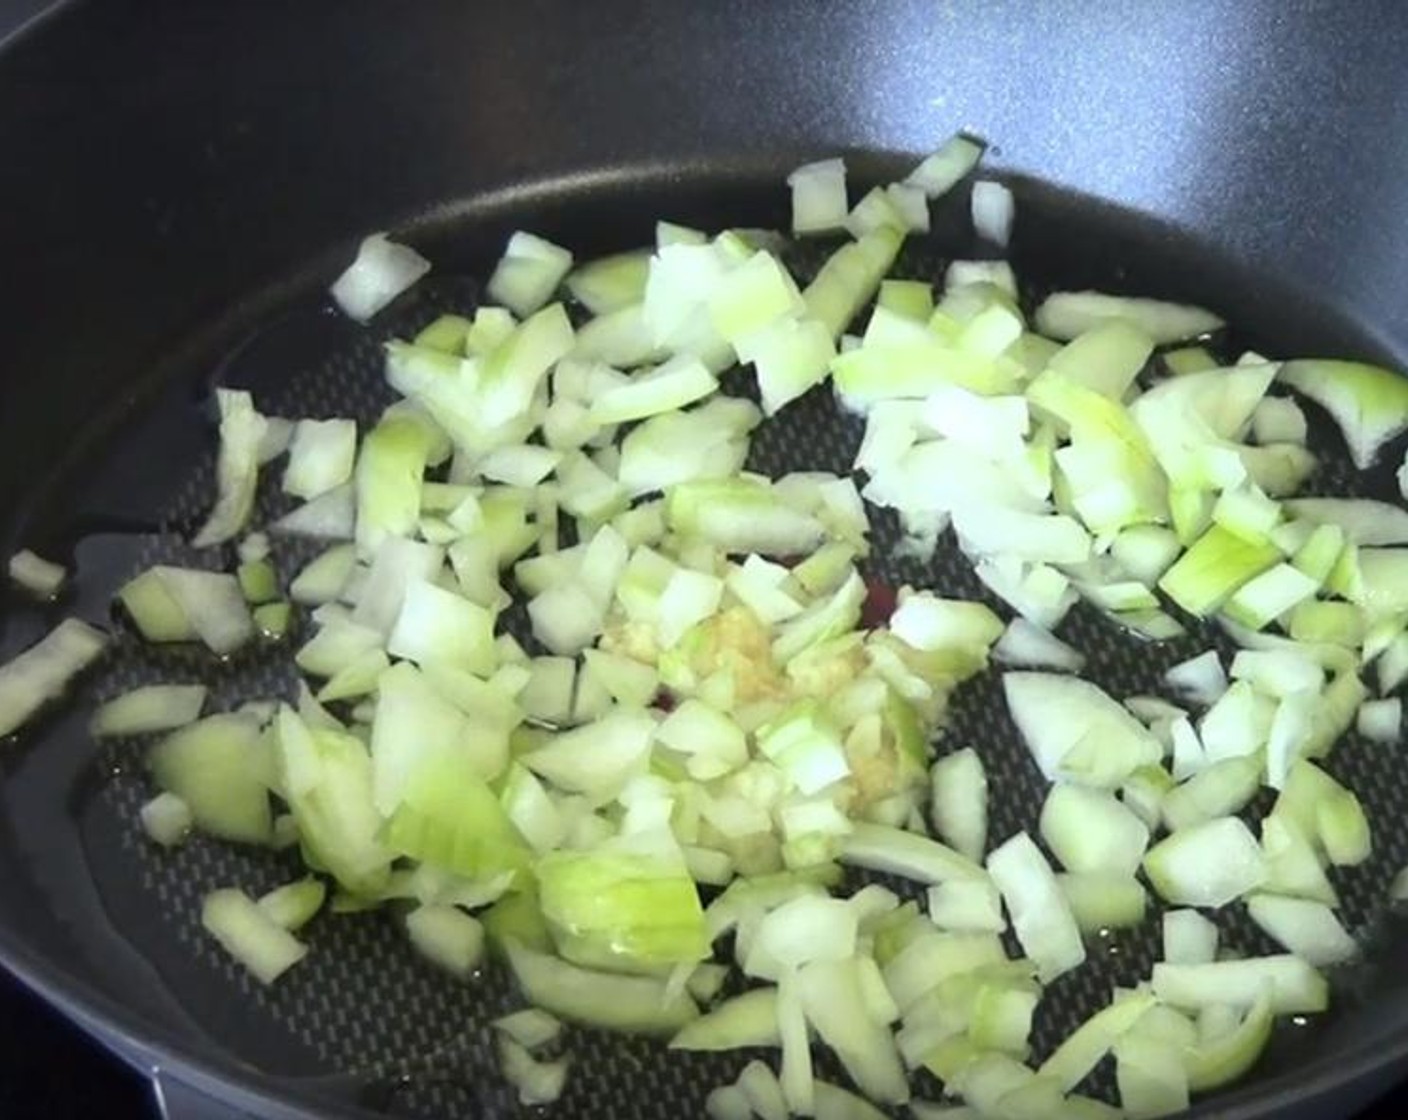 step 1 Put Olive Oil (as needed) into a frying pan. Add Garlic (1 clove) and Yellow Onion (1/2). Cook them over medium heat for two minutes. Turn off the heat and transfer to a bowl.